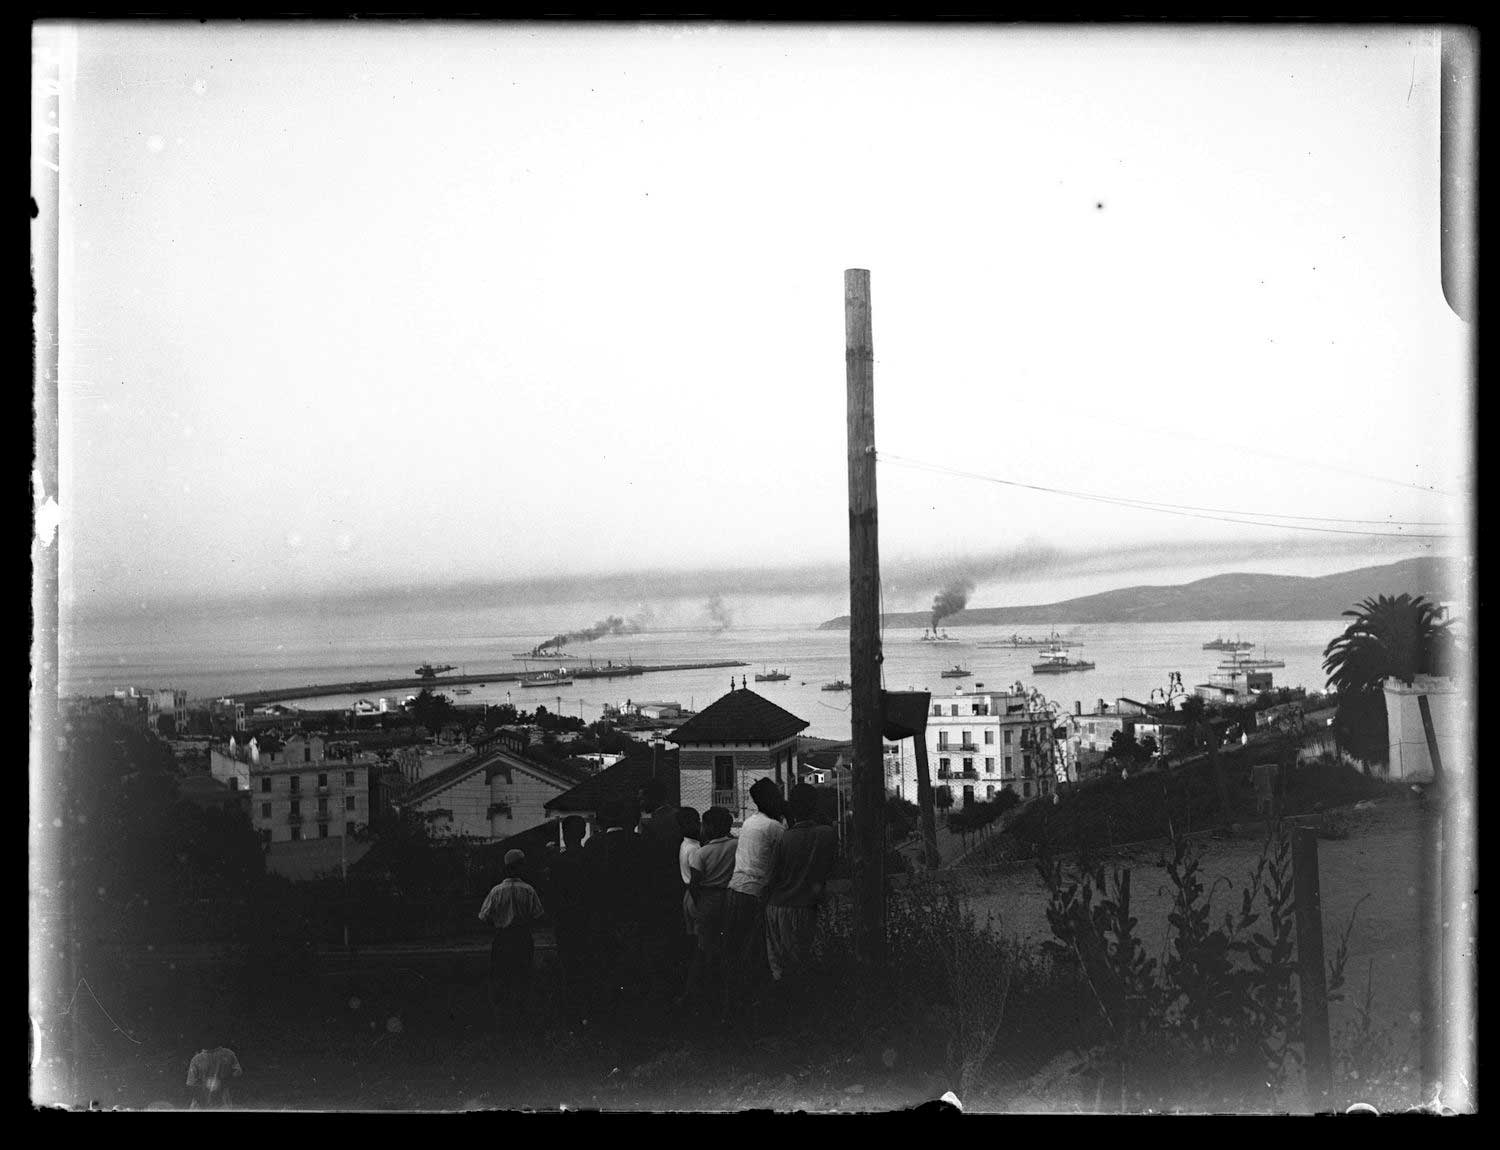 View of the harbor from higher ground to the south, children in the foreground